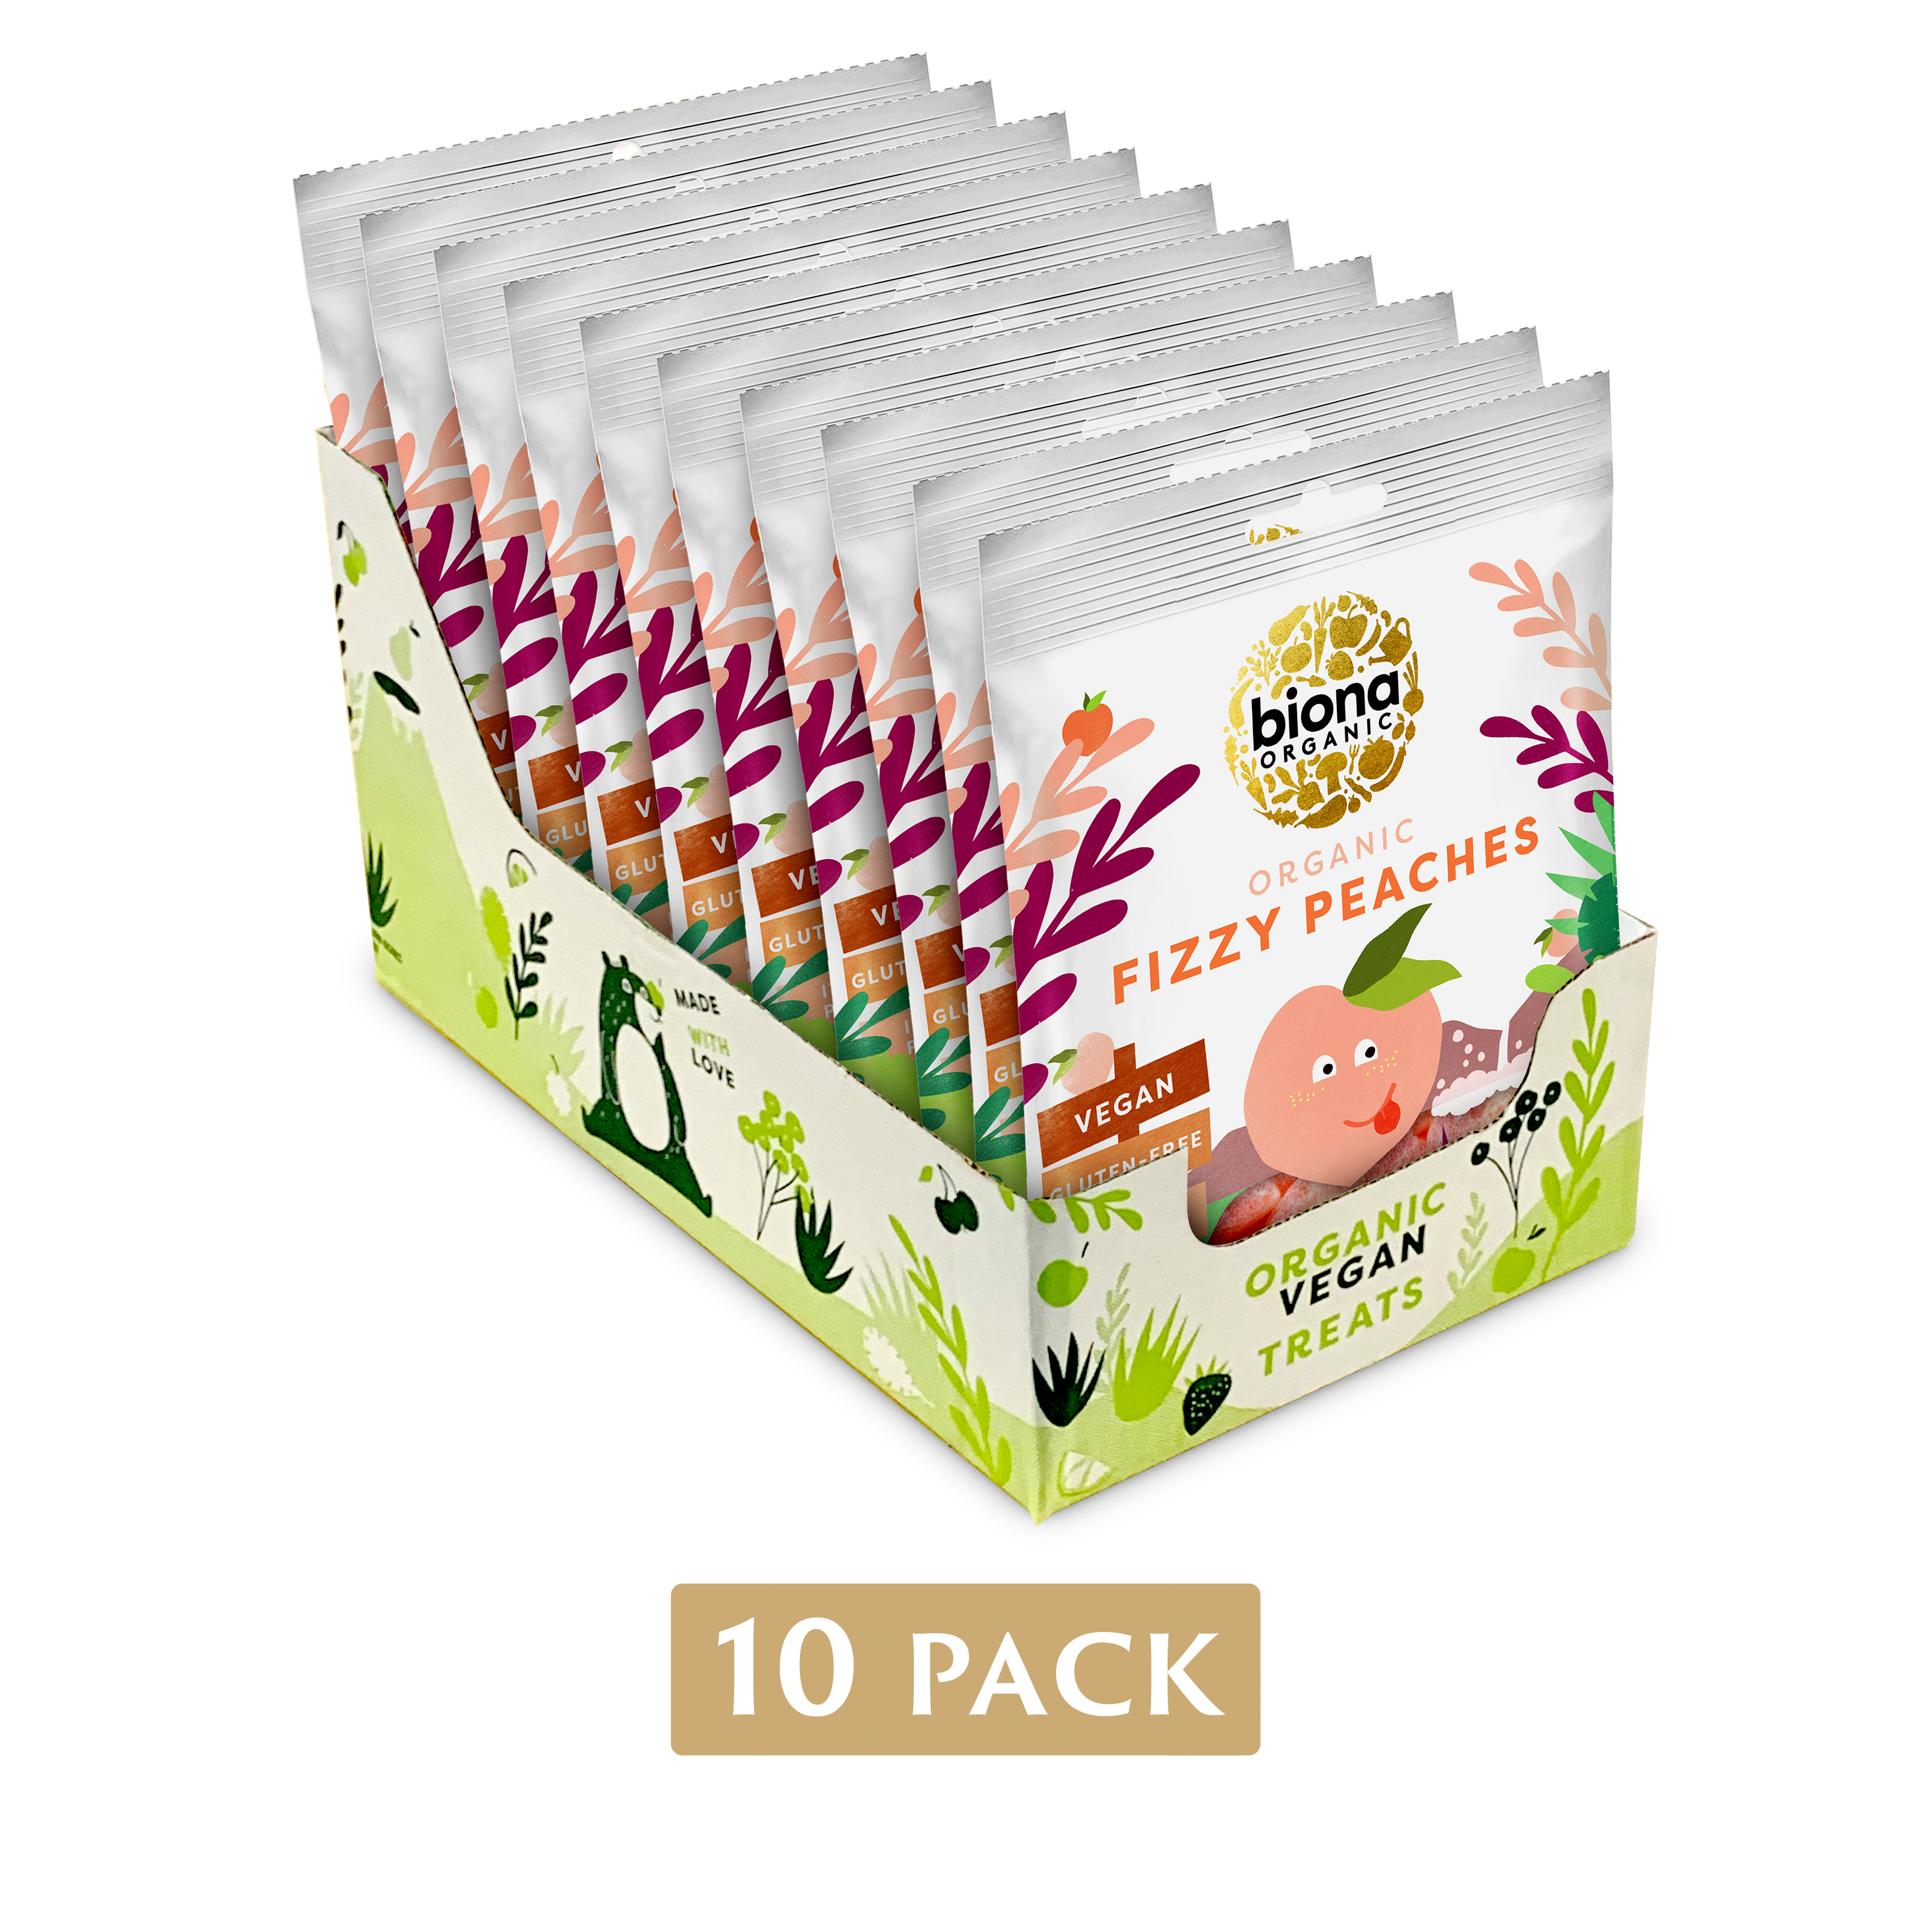 FIZZY PEACHES - 10 PACK